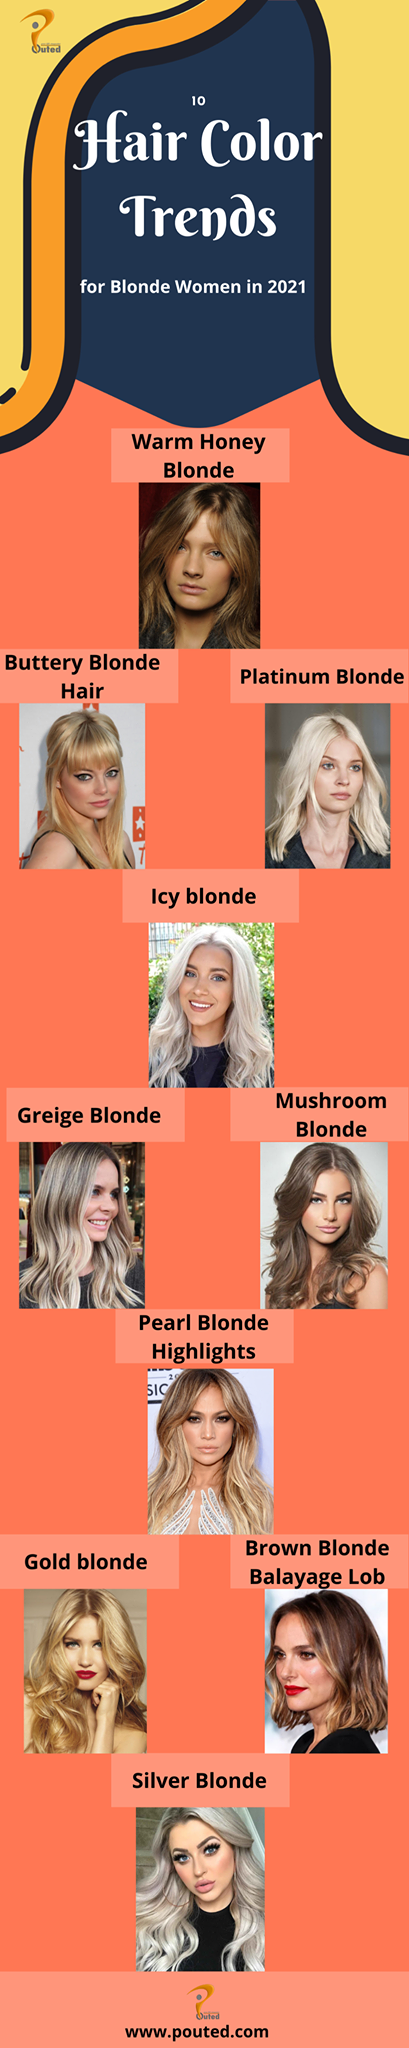 hair-color-trends-for-blonde-women Top 10 Hair Color Trends for Blonde Women in 2022